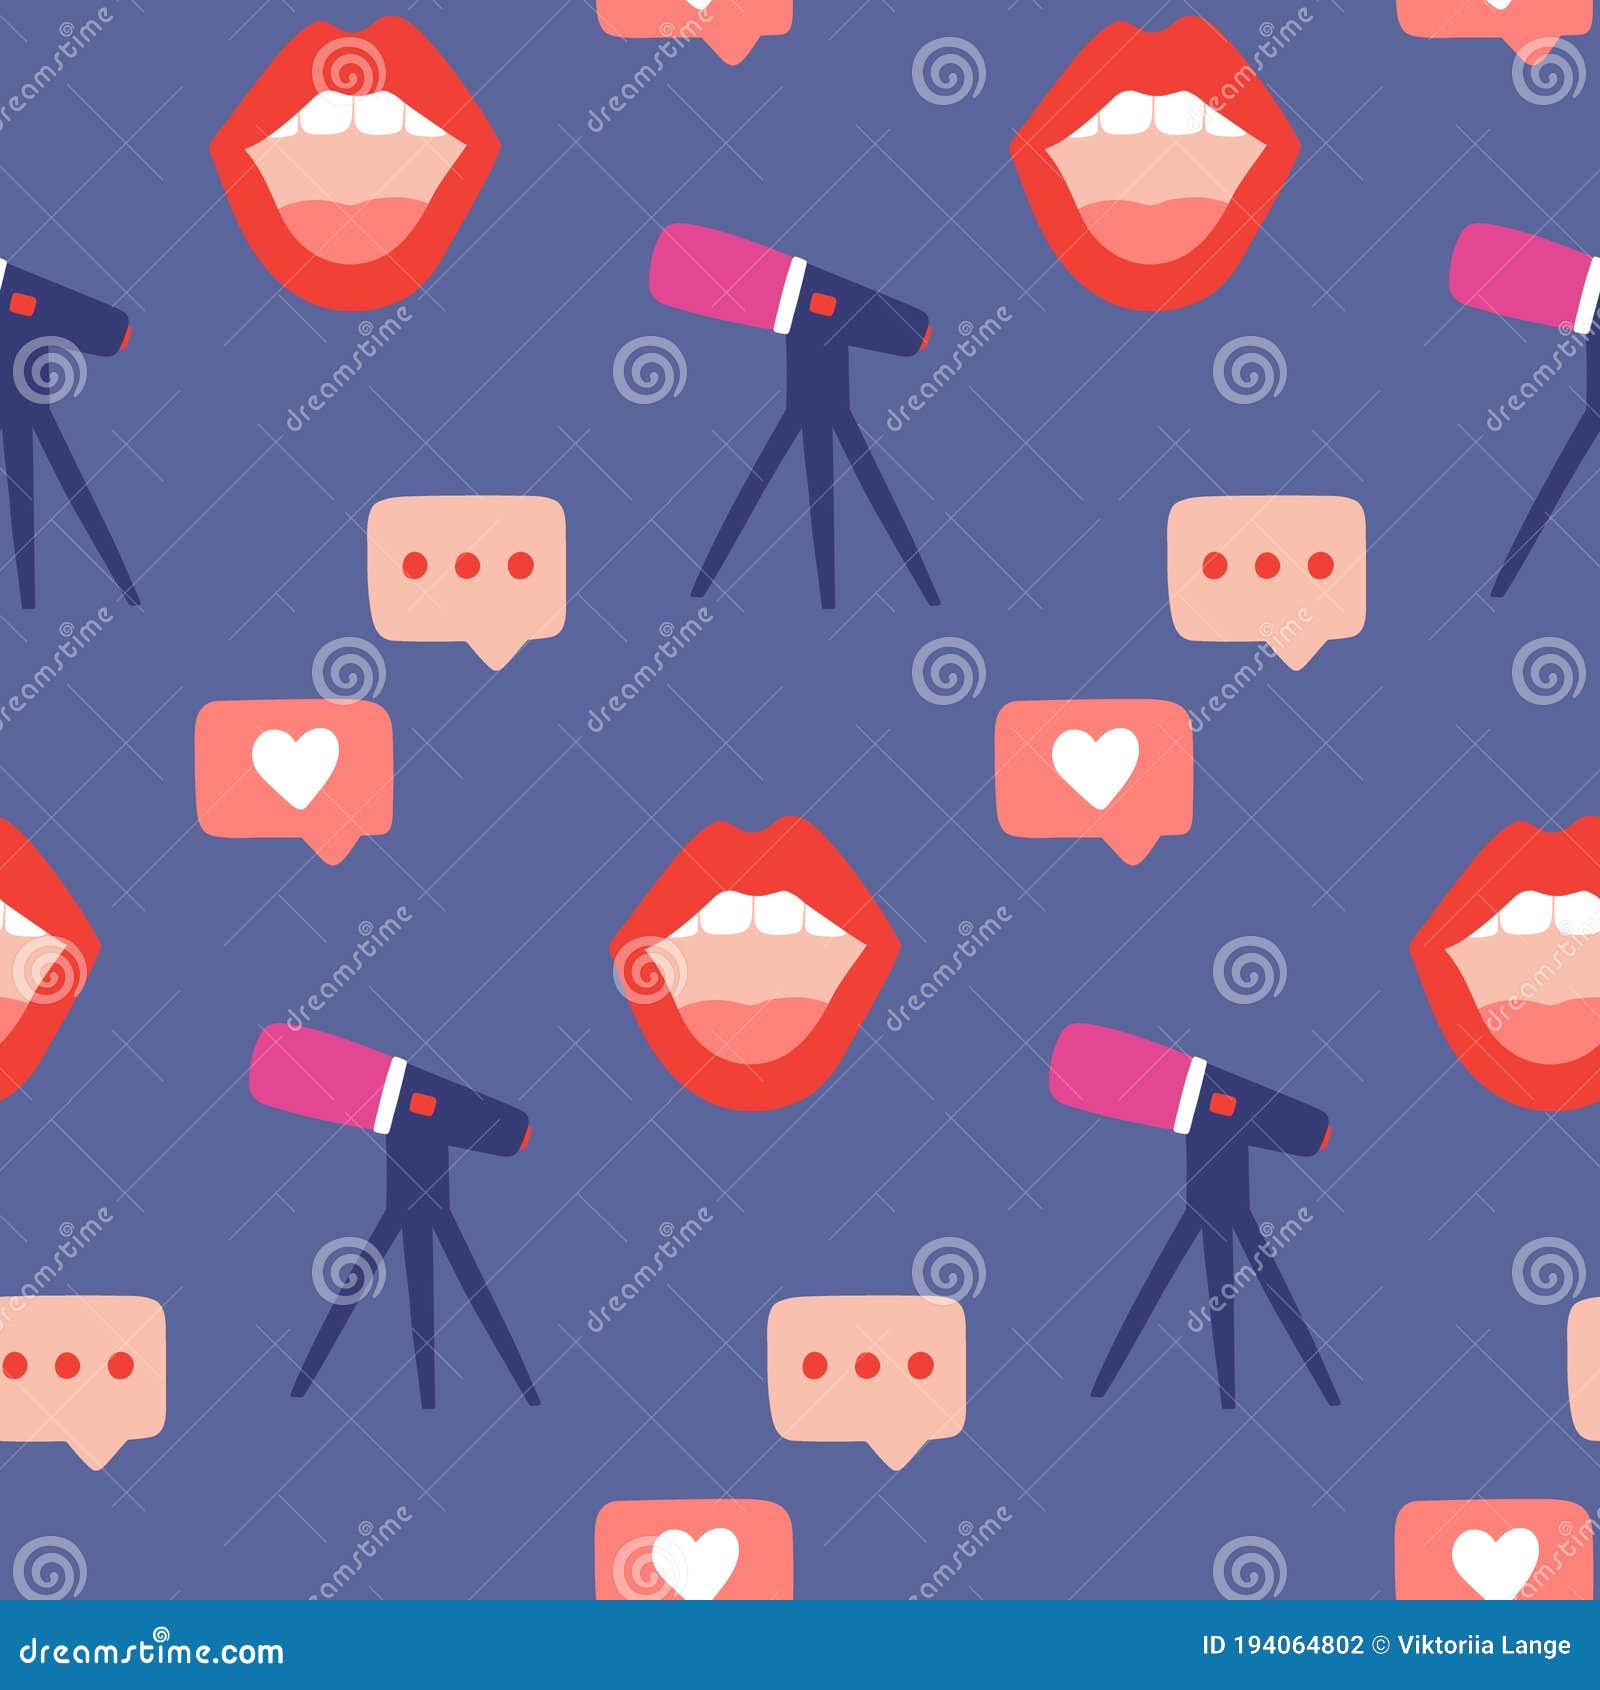 podcast seamless pattern. background for blogging, vlogging and live streaming.